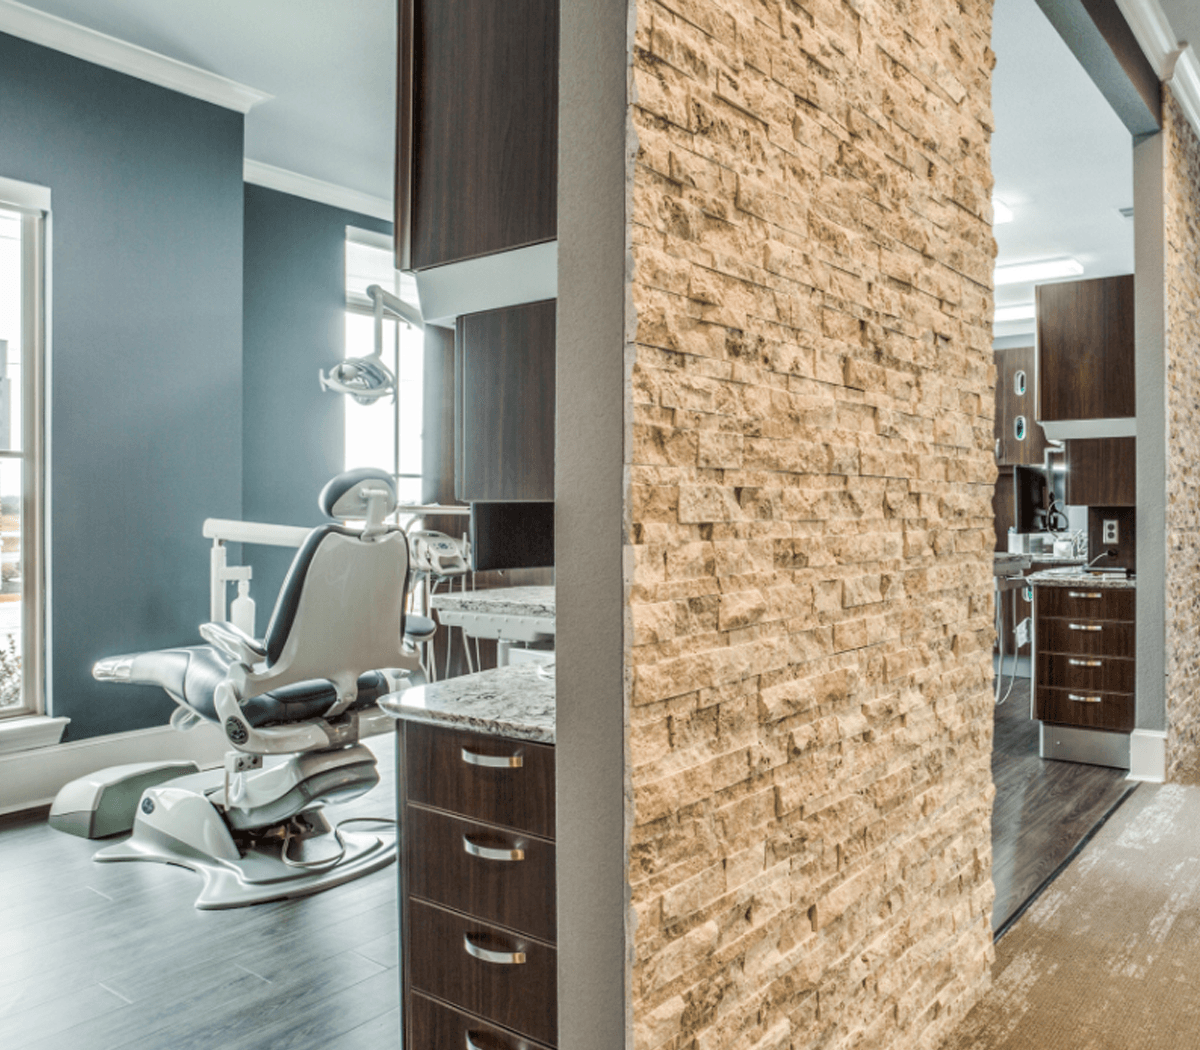 Discover some of the most popular frameworks for dental office design and find inspiration when planning a new or updated dental office.